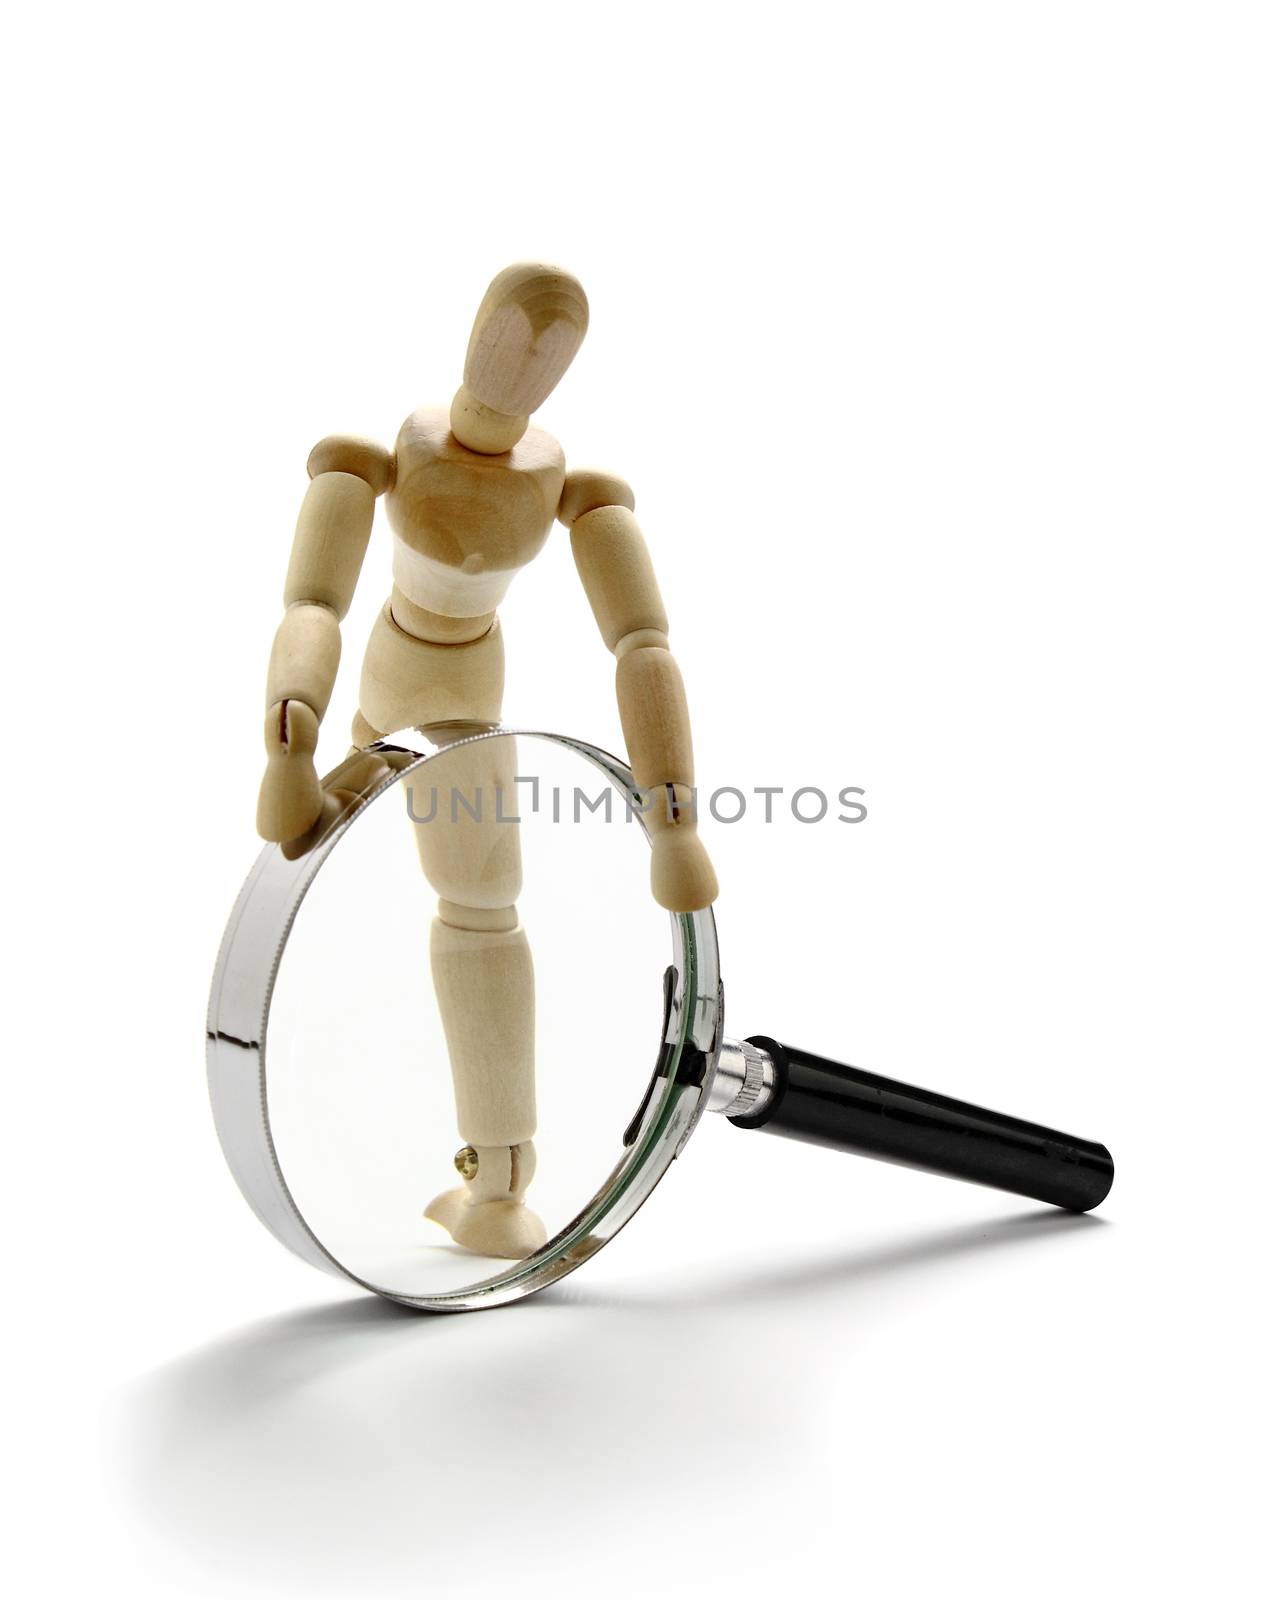 Wooden manikin and a magnification glass on white background